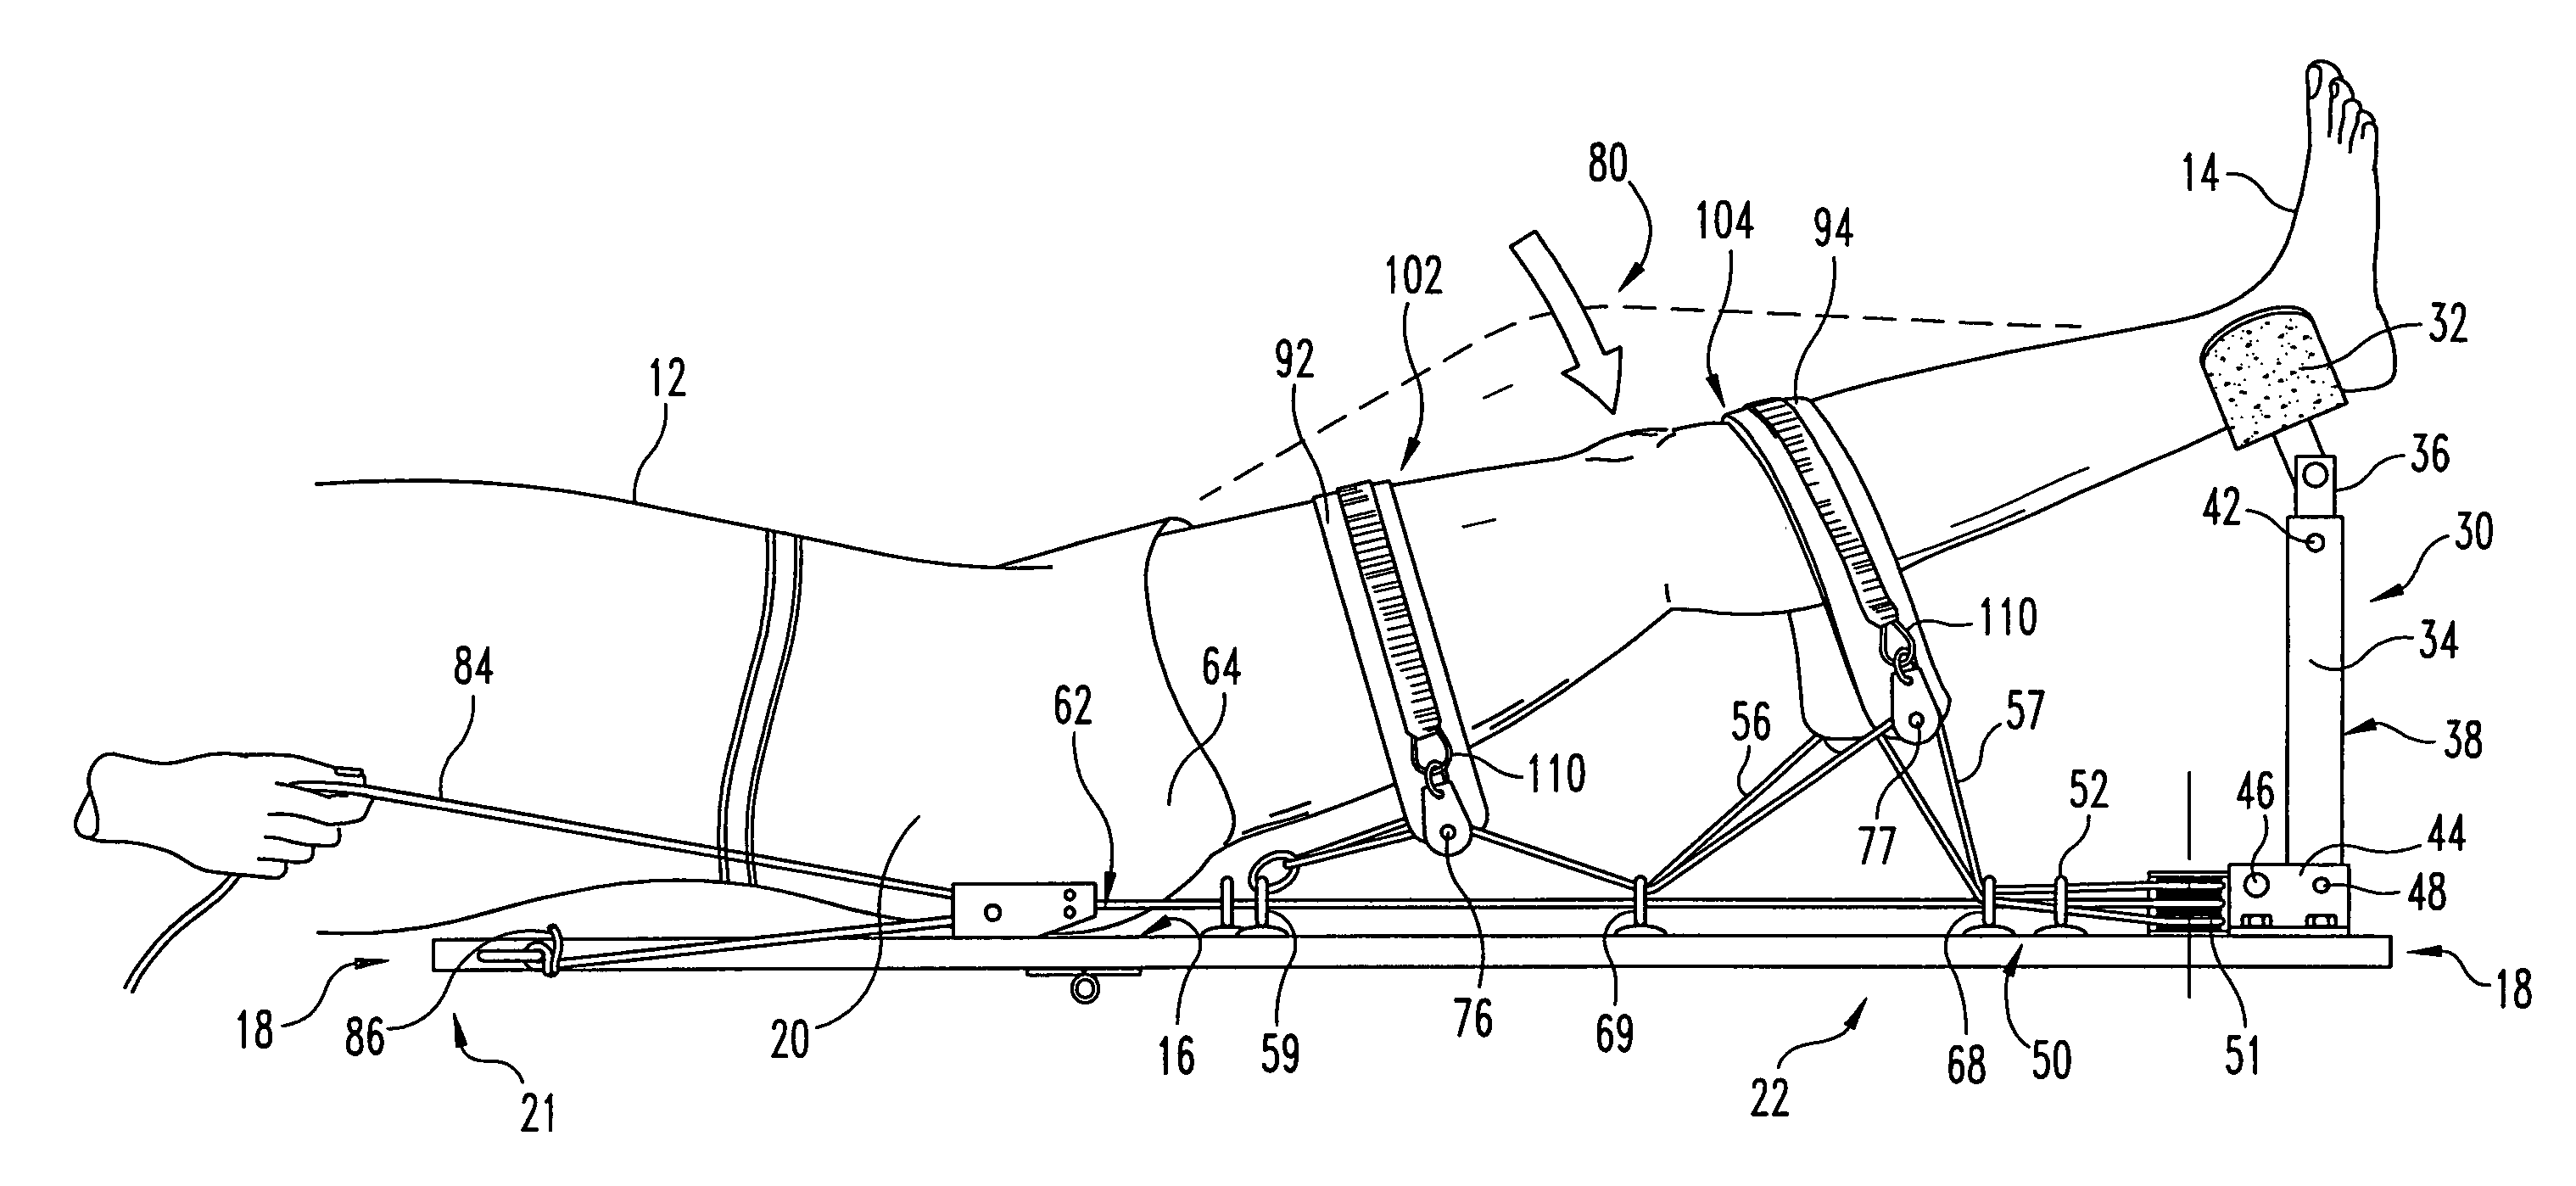 Knee extension therapy apparatus